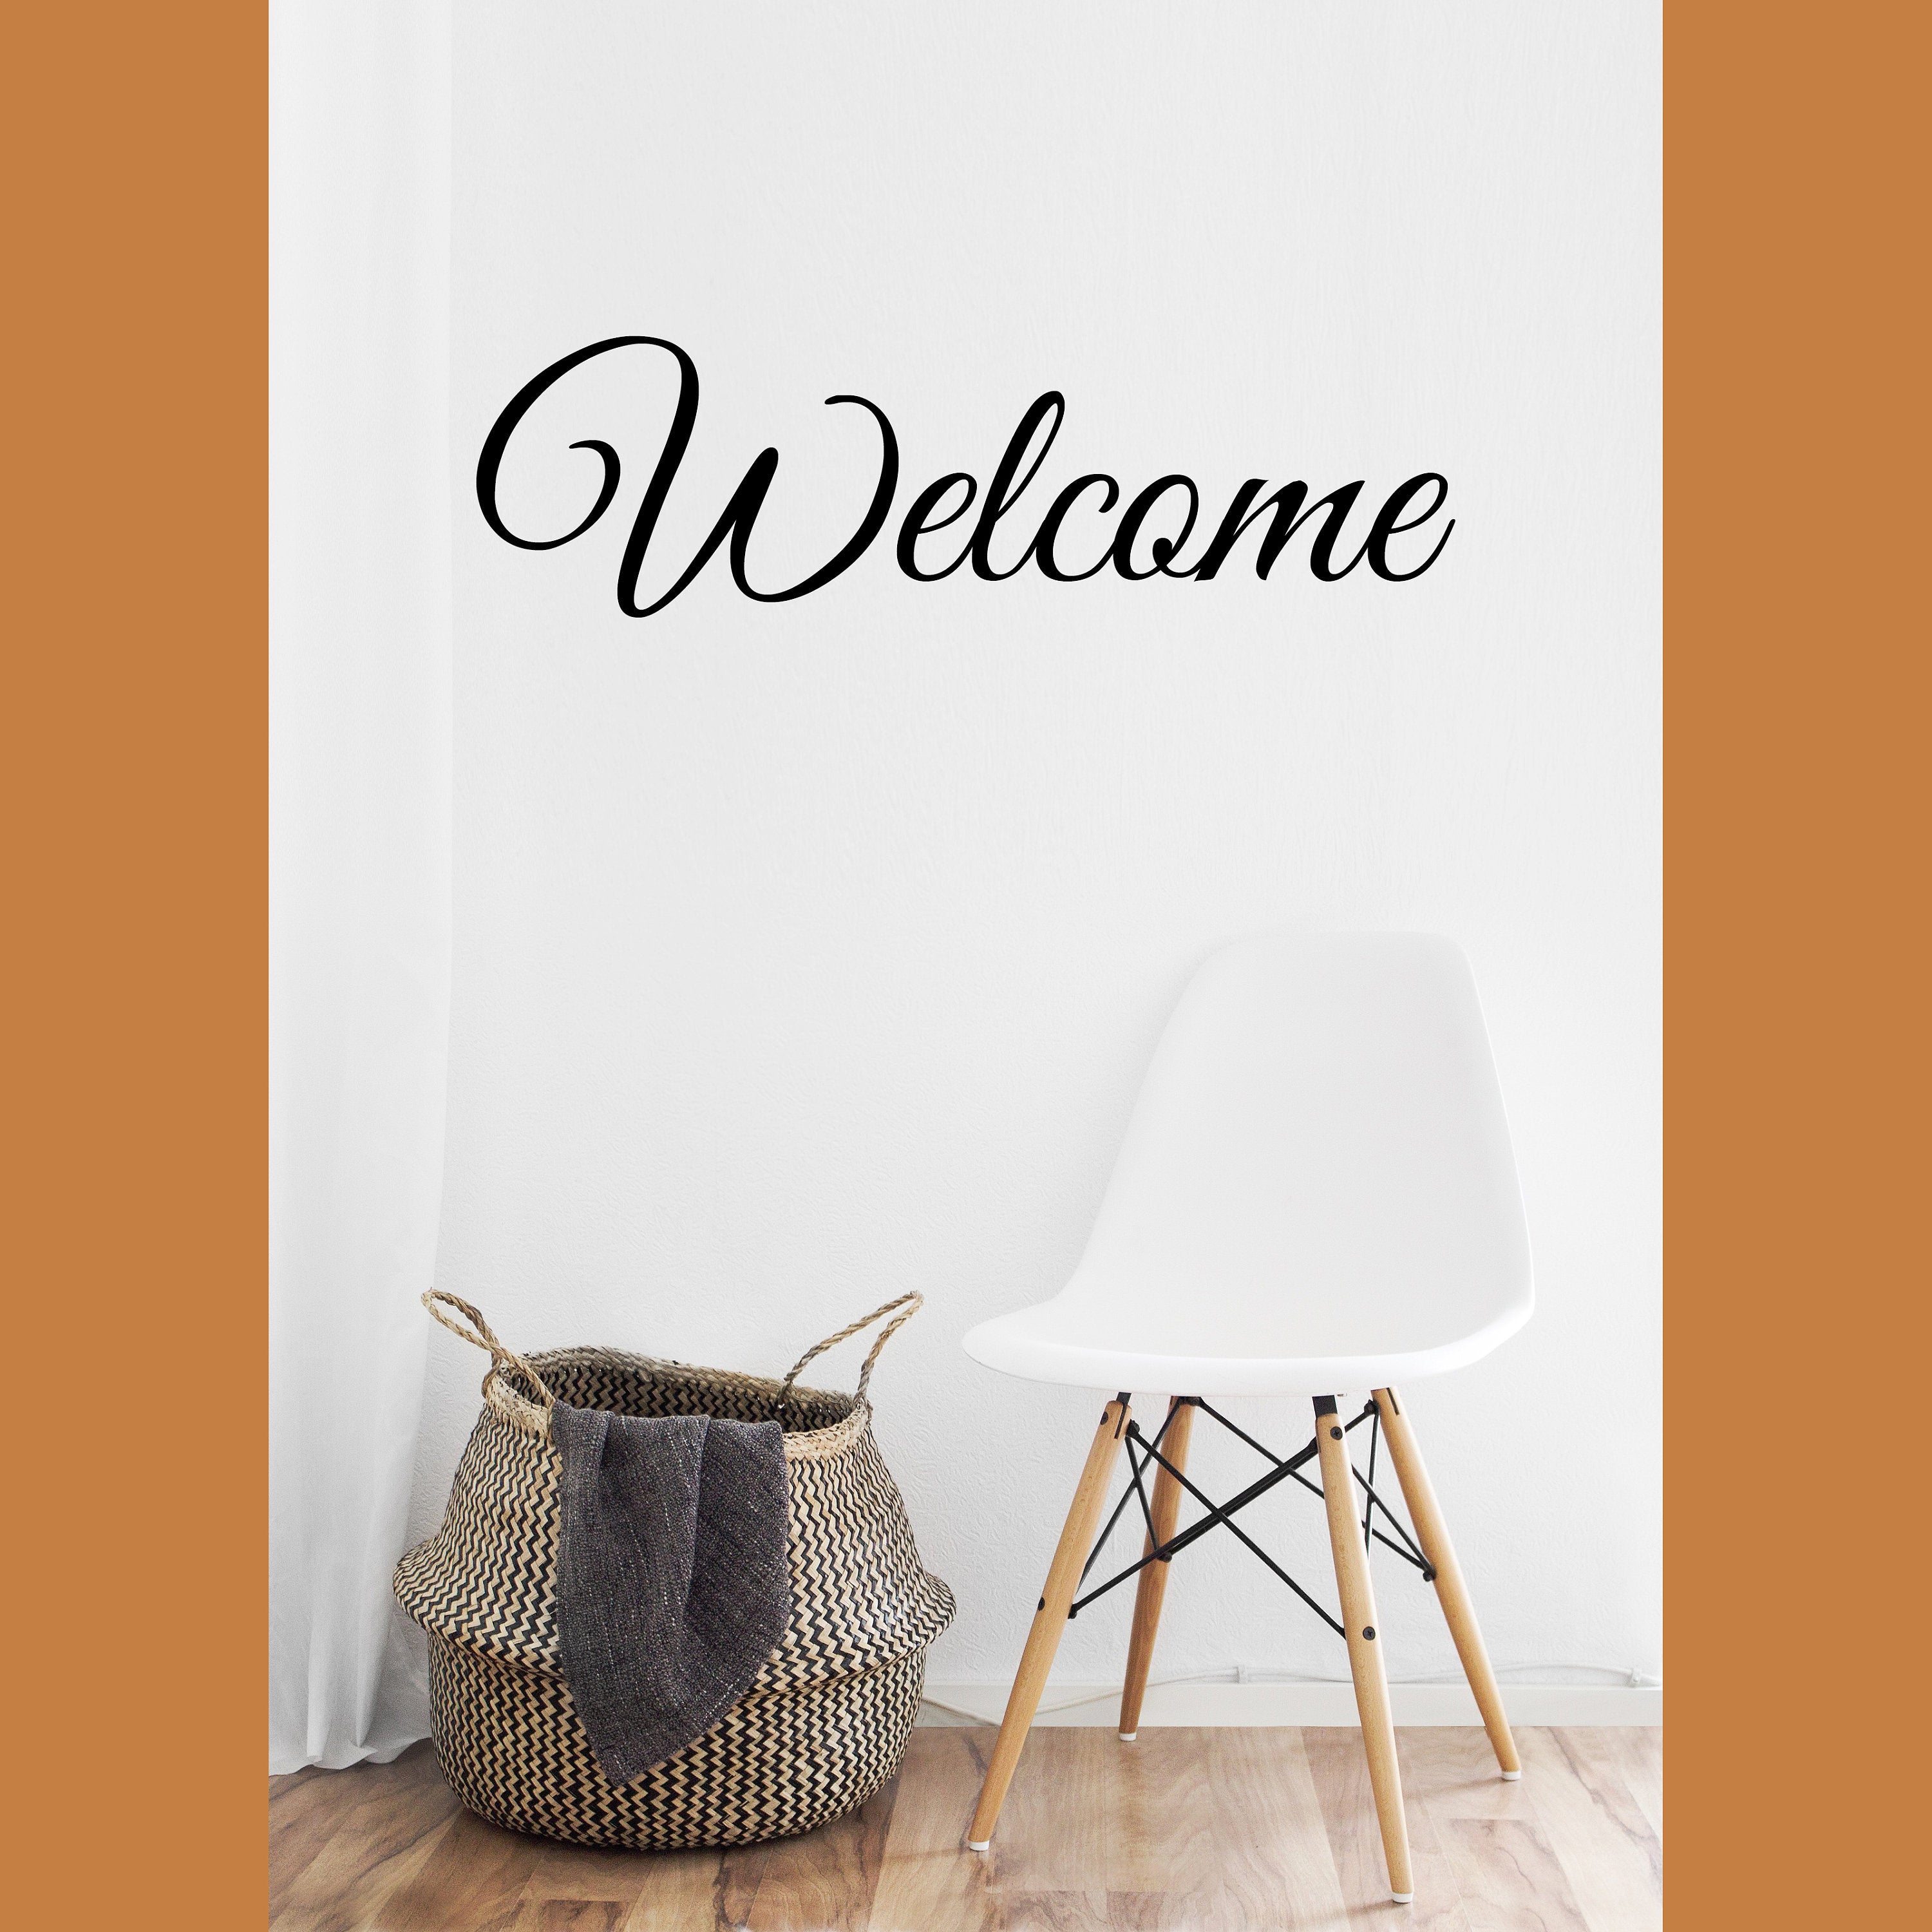 Welcome - Vinyl Wall Decal - Home Decor for Walls, Doors, Entryway, Great as Housewarming Gift or Present,